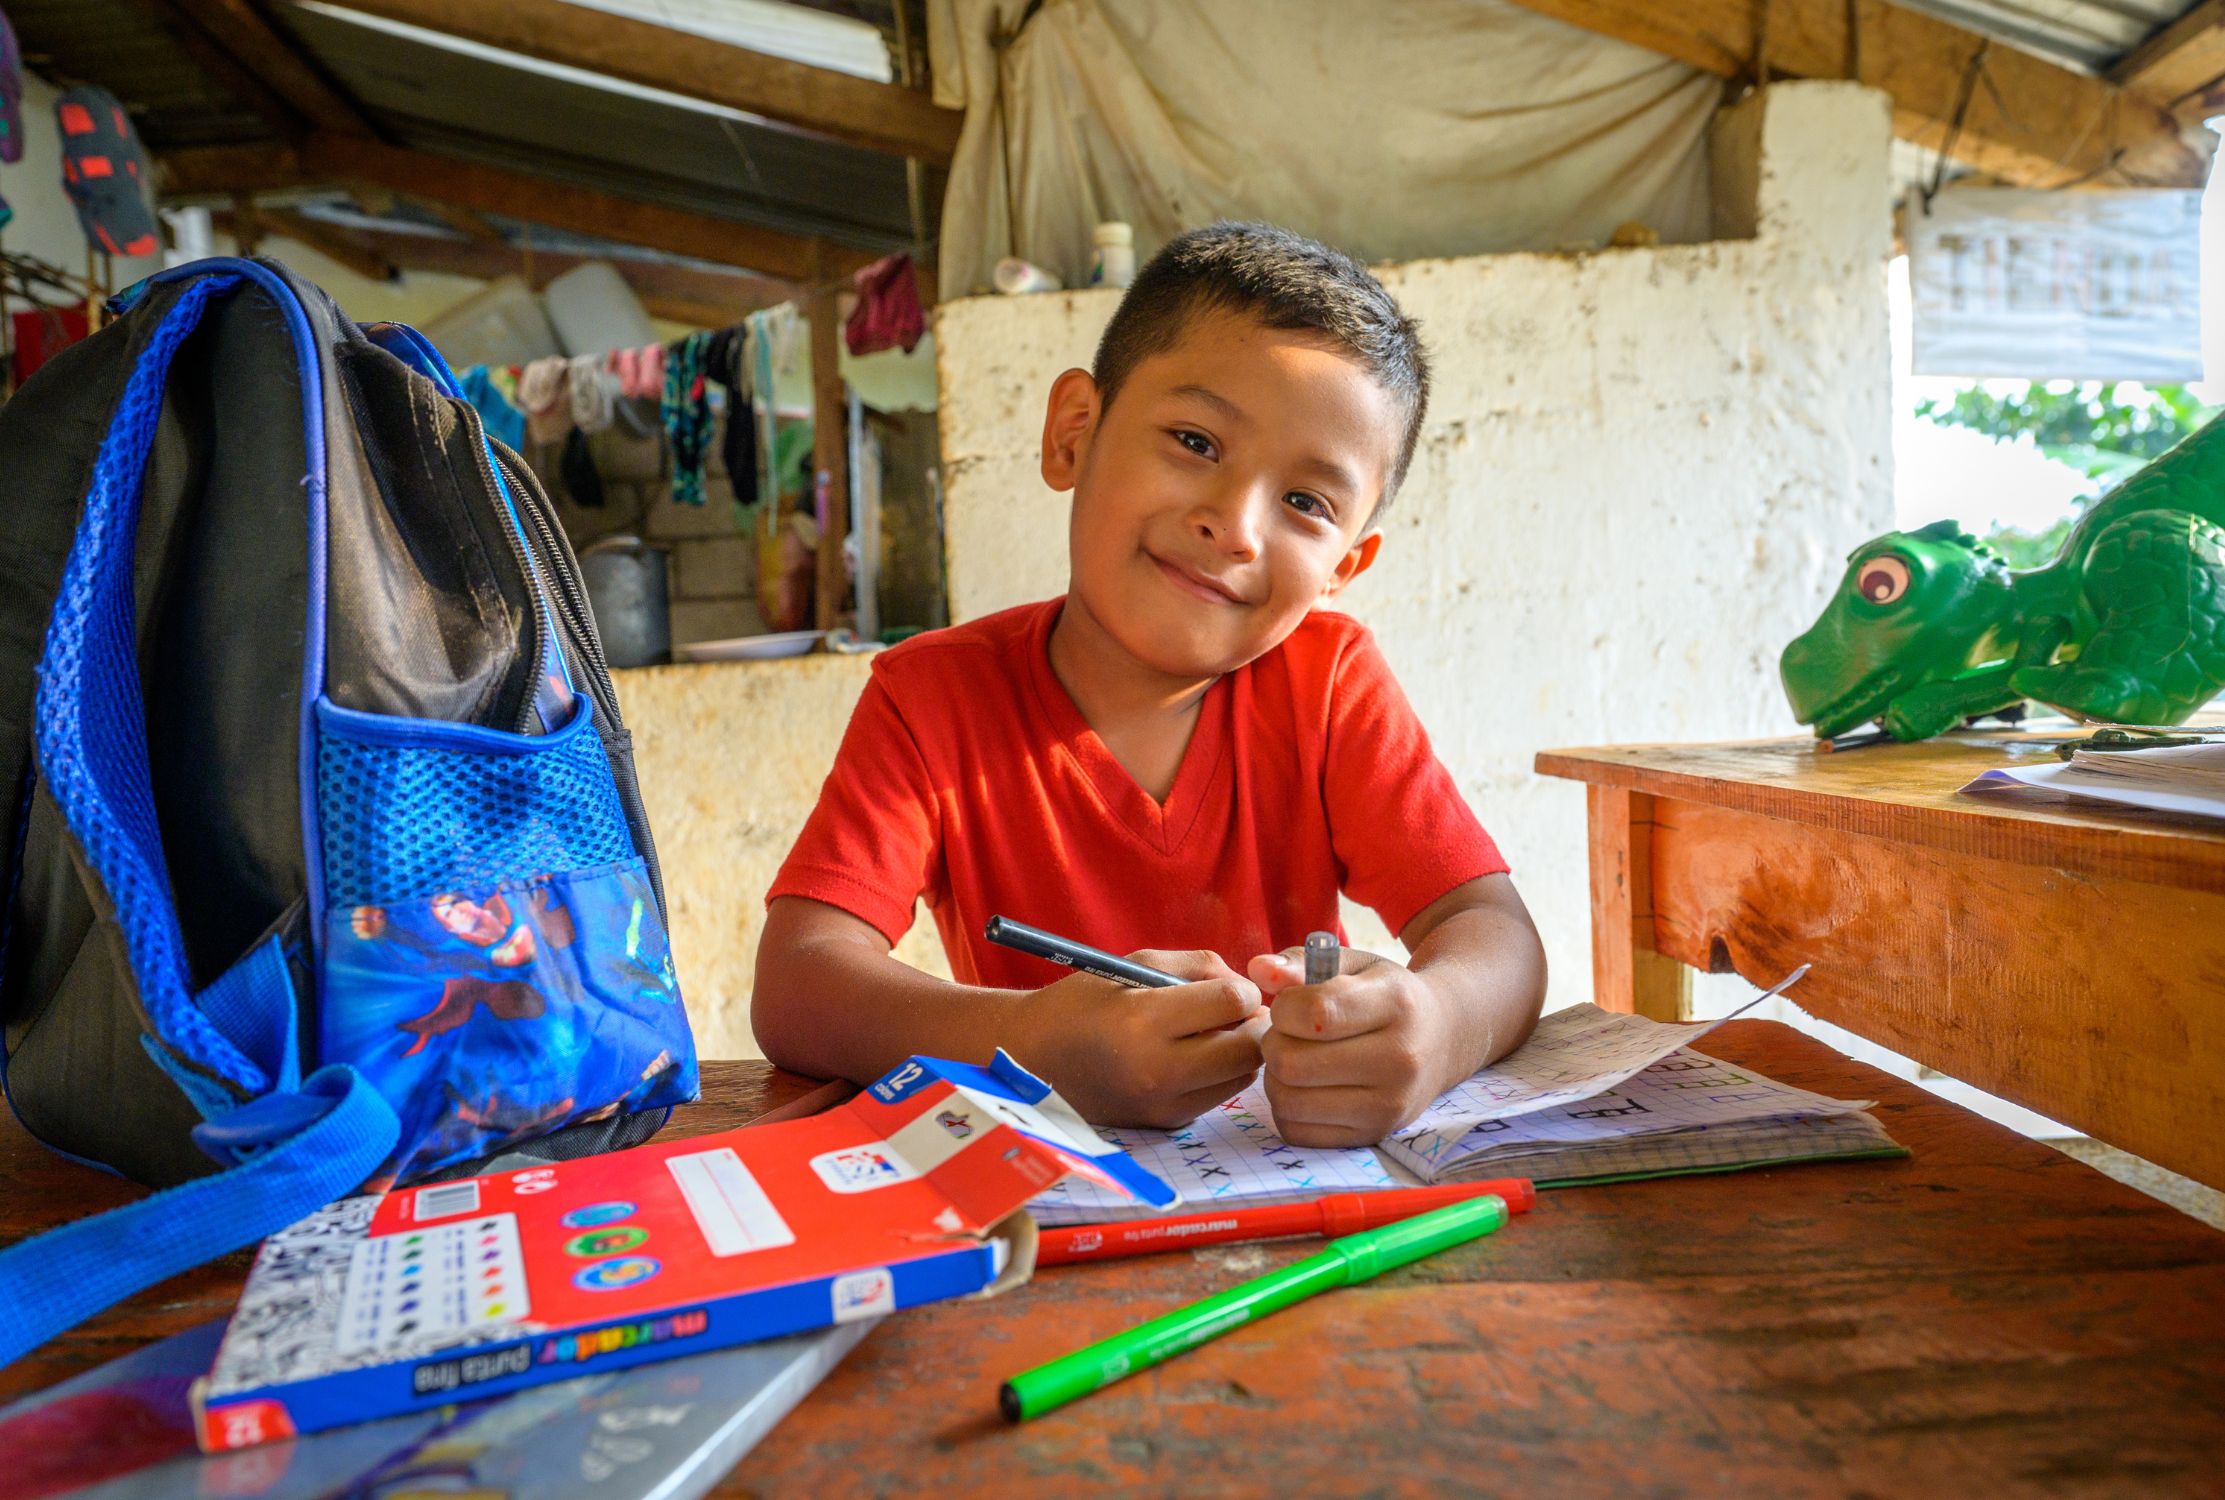 Boy from Guatemala sits at a desk and smiles with his school books